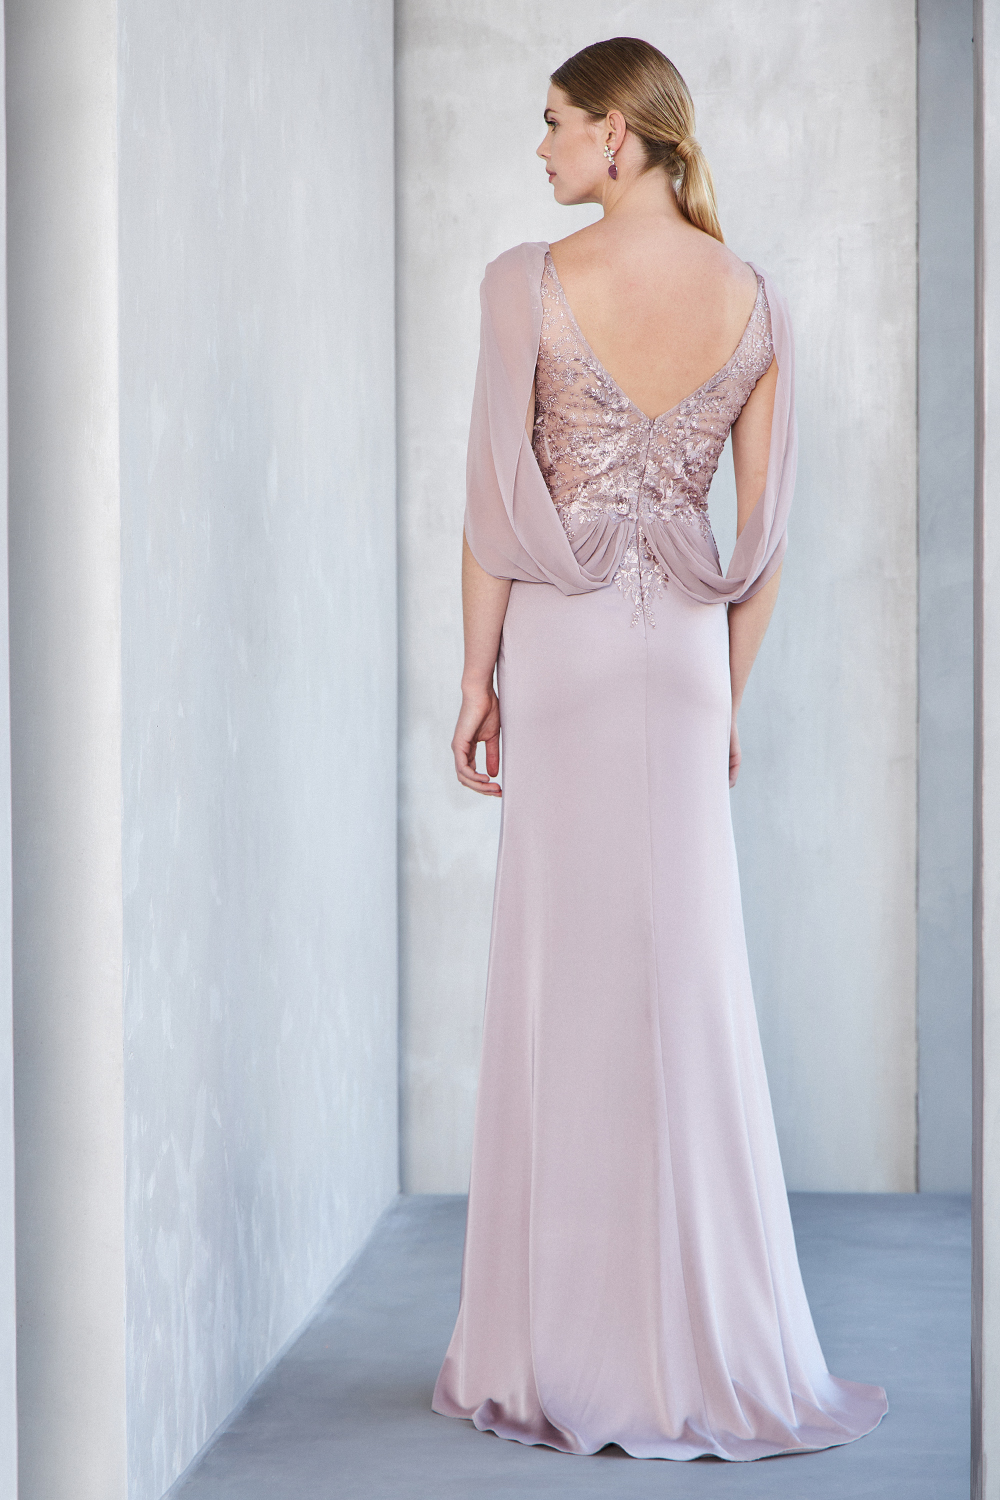 Long evening satin beaded dress with lace top and long sleeves with chiffon